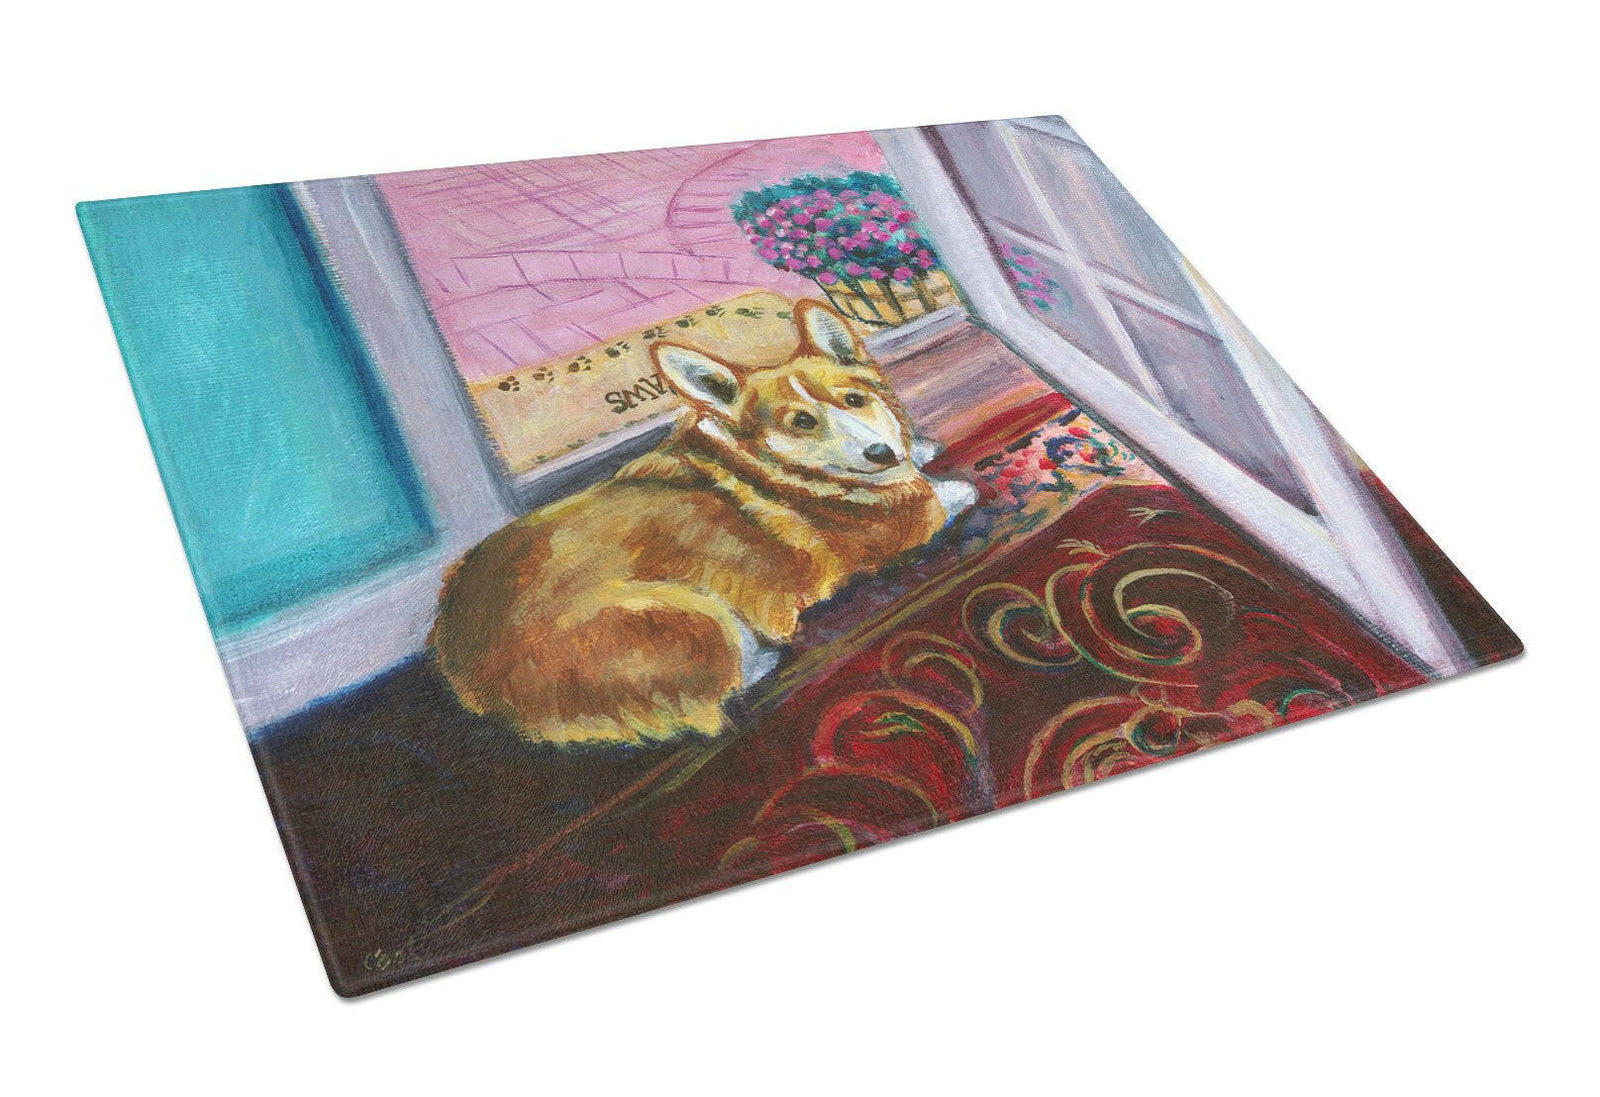 Corgi Watching from the Door Glass Cutting Board Large 7410LCB by Caroline's Treasures